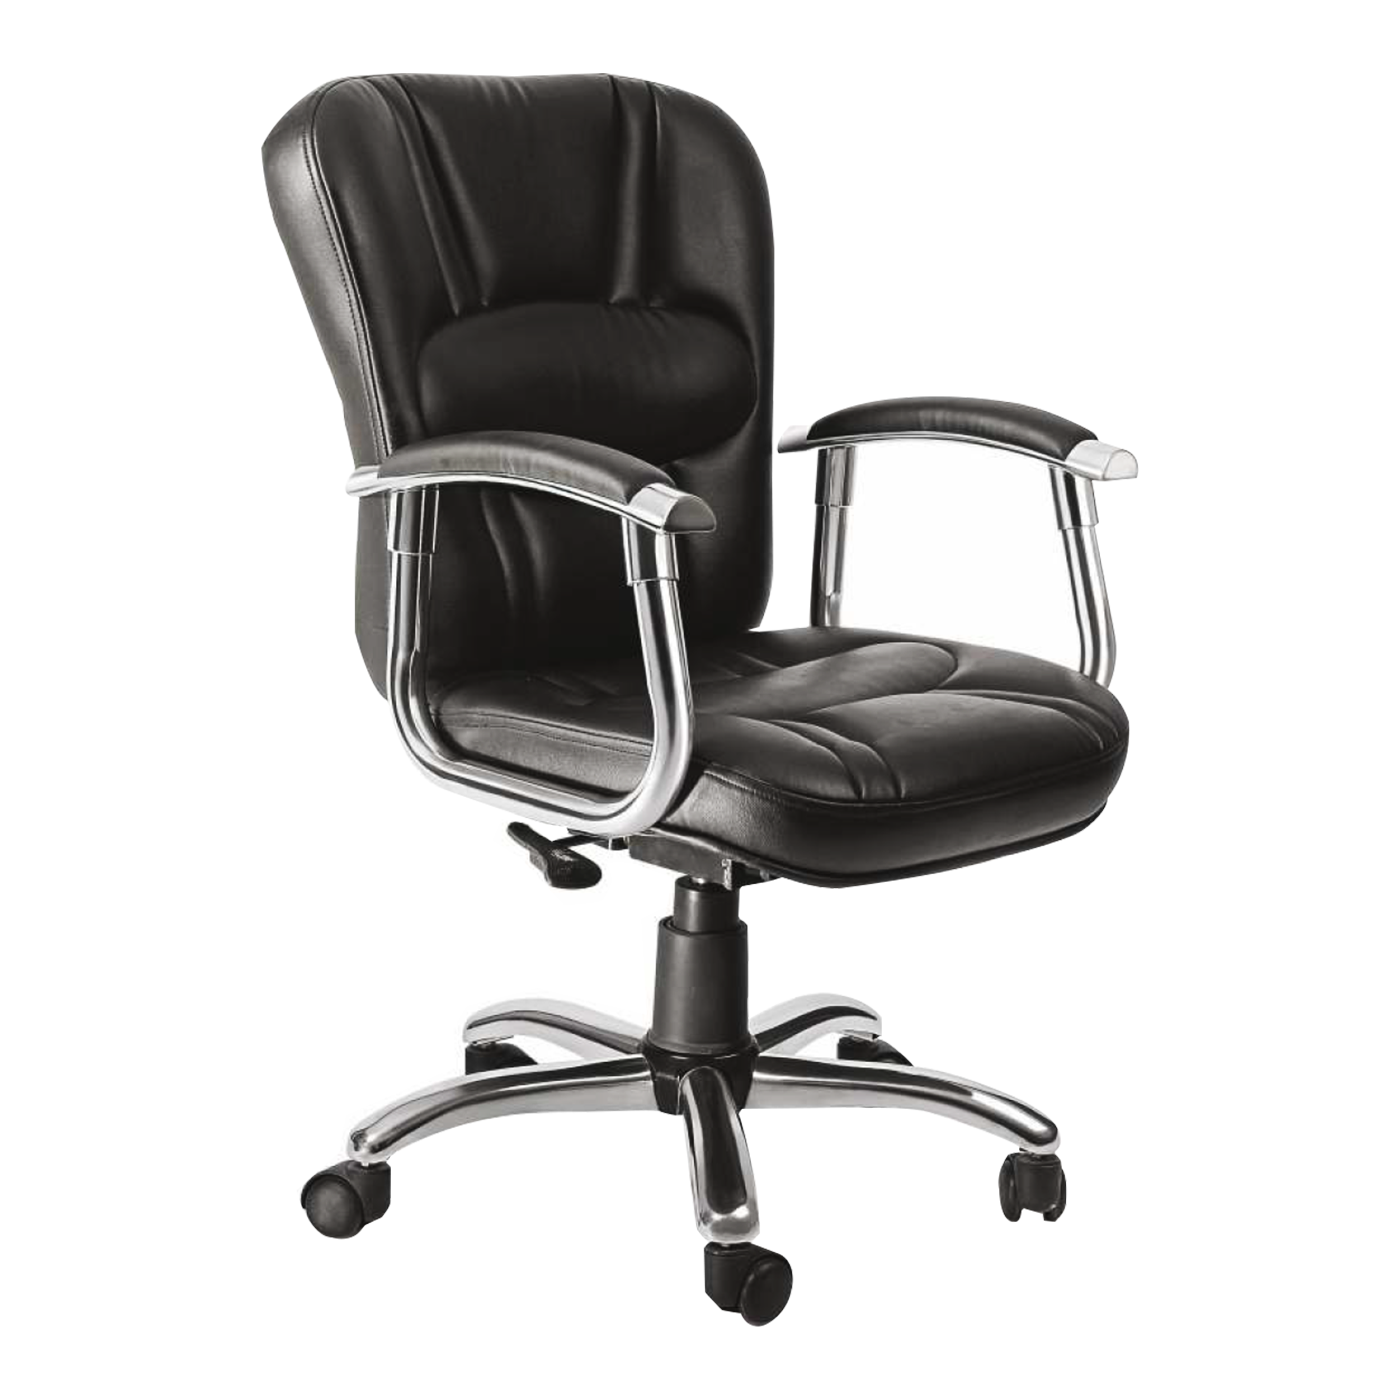 Detec™ Executive Chair push back facility top cushion arms hydraulic crome base in leather black 